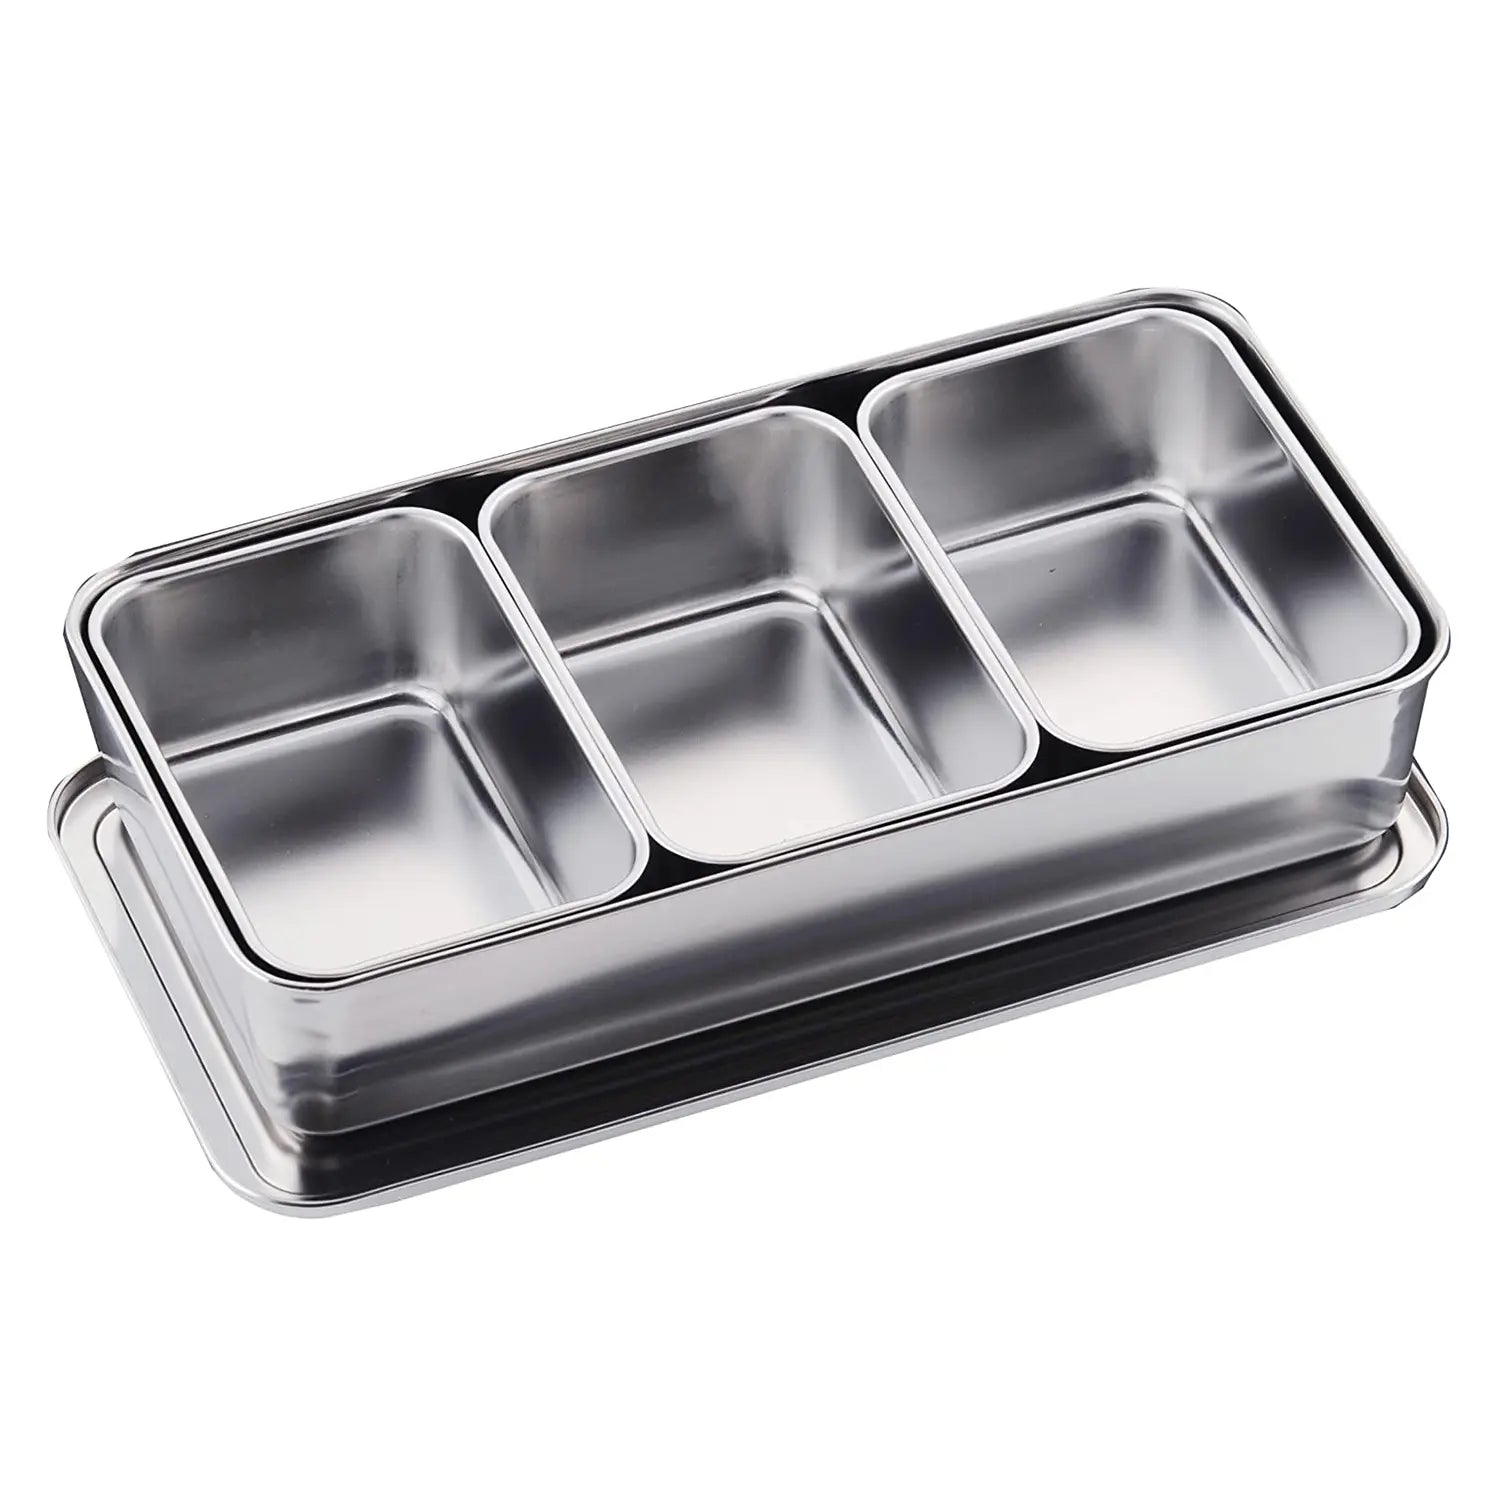 Mise en Place Yakumi Pan - 3 Compartment with Lid